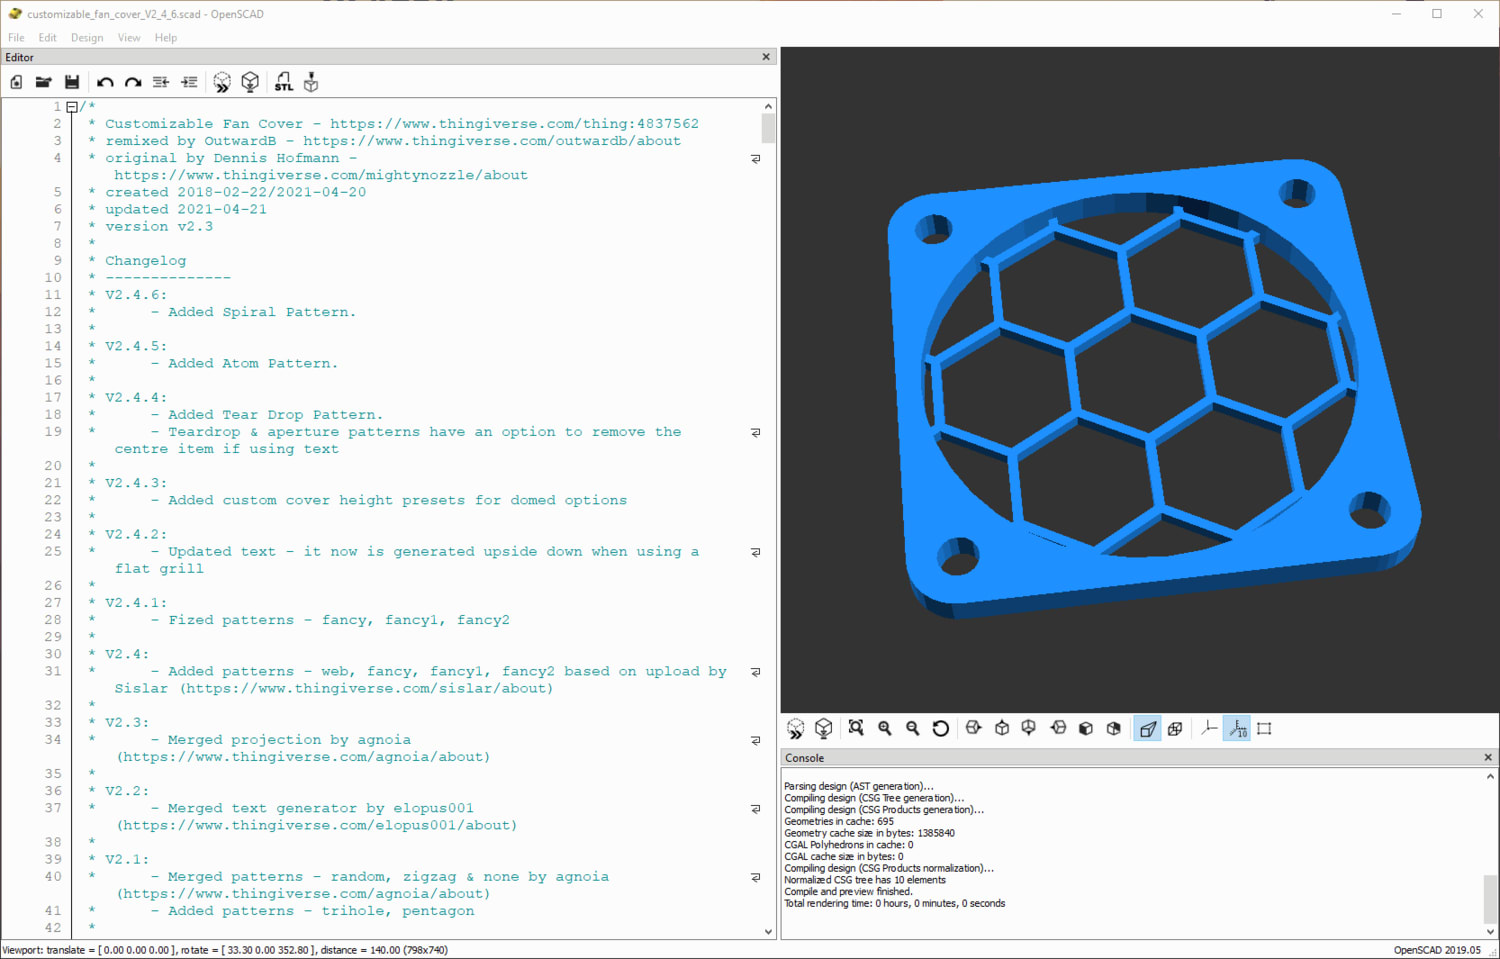 PSA: You can easily run Thingiverse customizer on your own PC by downloading OpenSCAD (Windows, Mac, Linux)